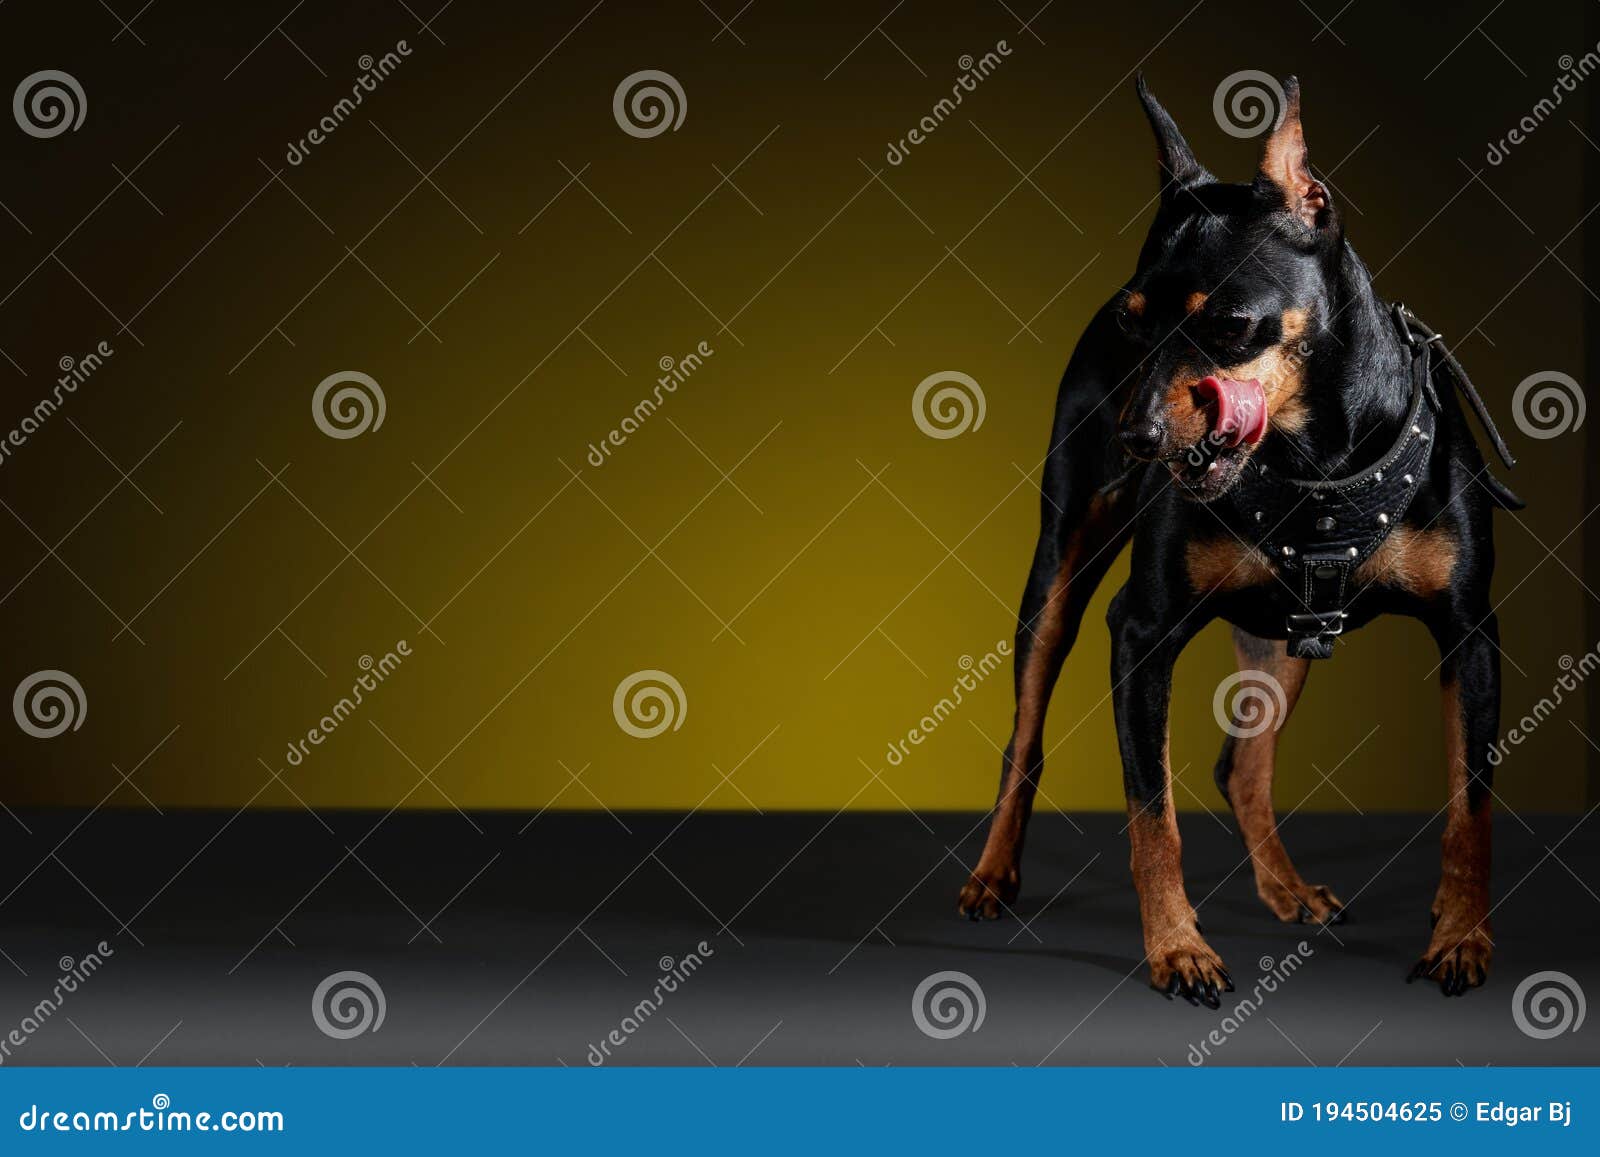 miniature doberman dog with tongue sticking out